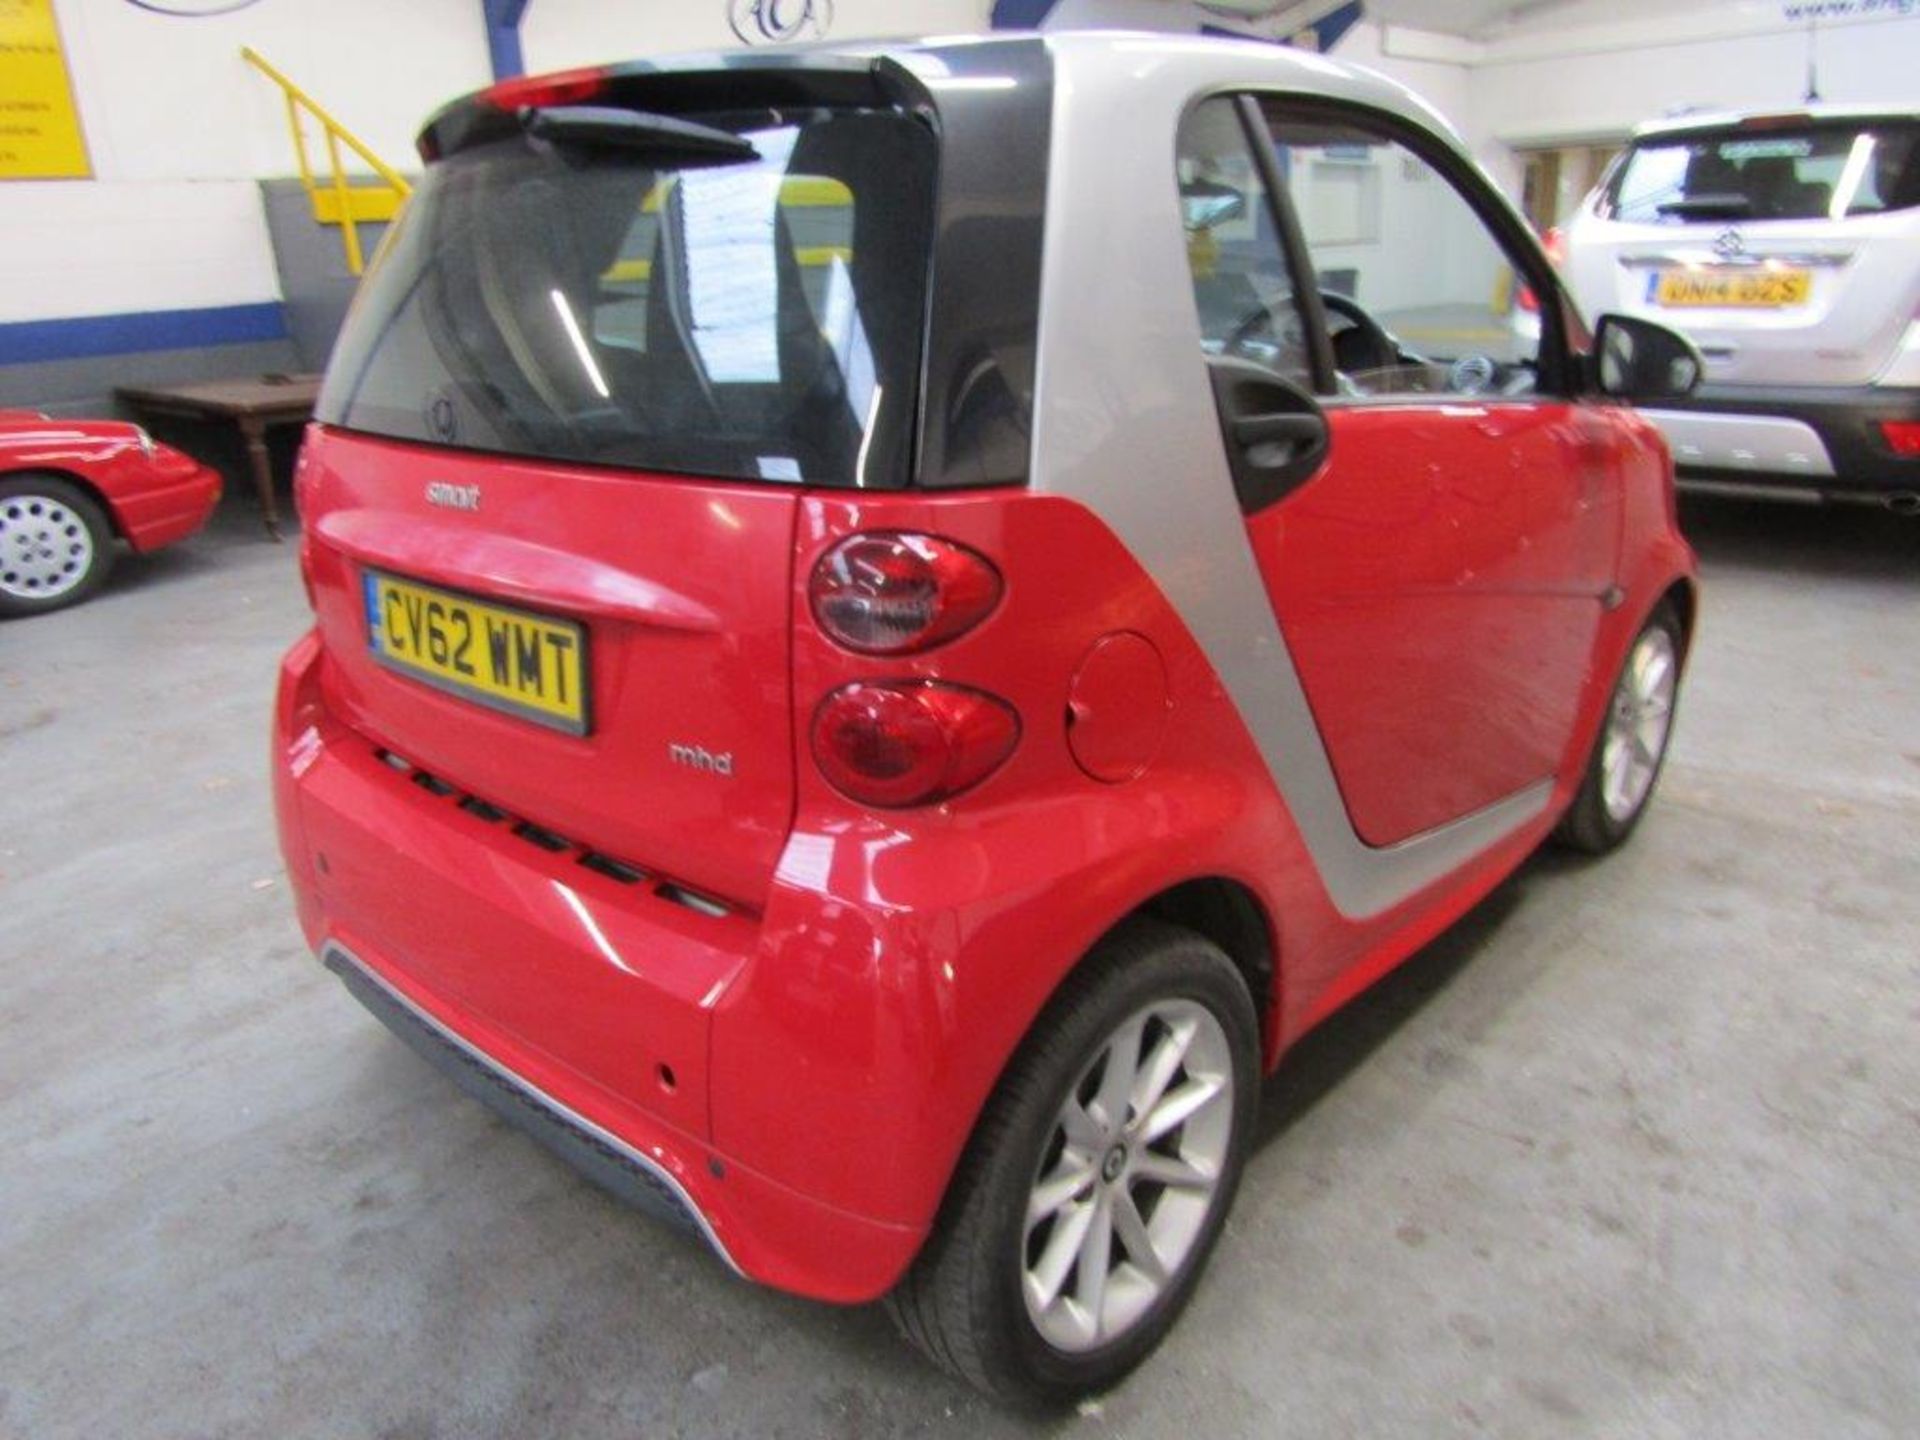 62 12 Smart Fortwo Passion Auto - Image 9 of 18